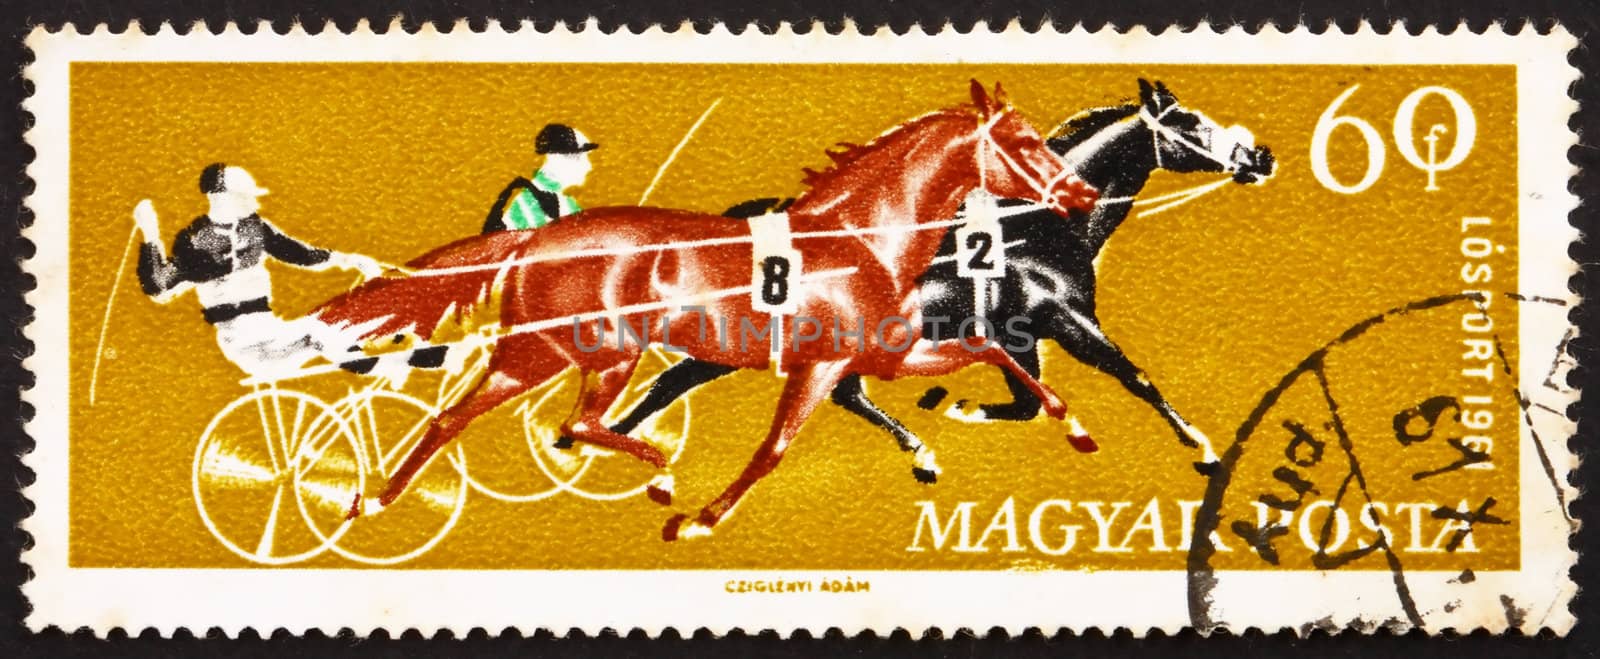 HUNGARY - CIRCA 1961: a stamp printed in the Hungary shows Two Trotters, Horse Racing, circa 1961